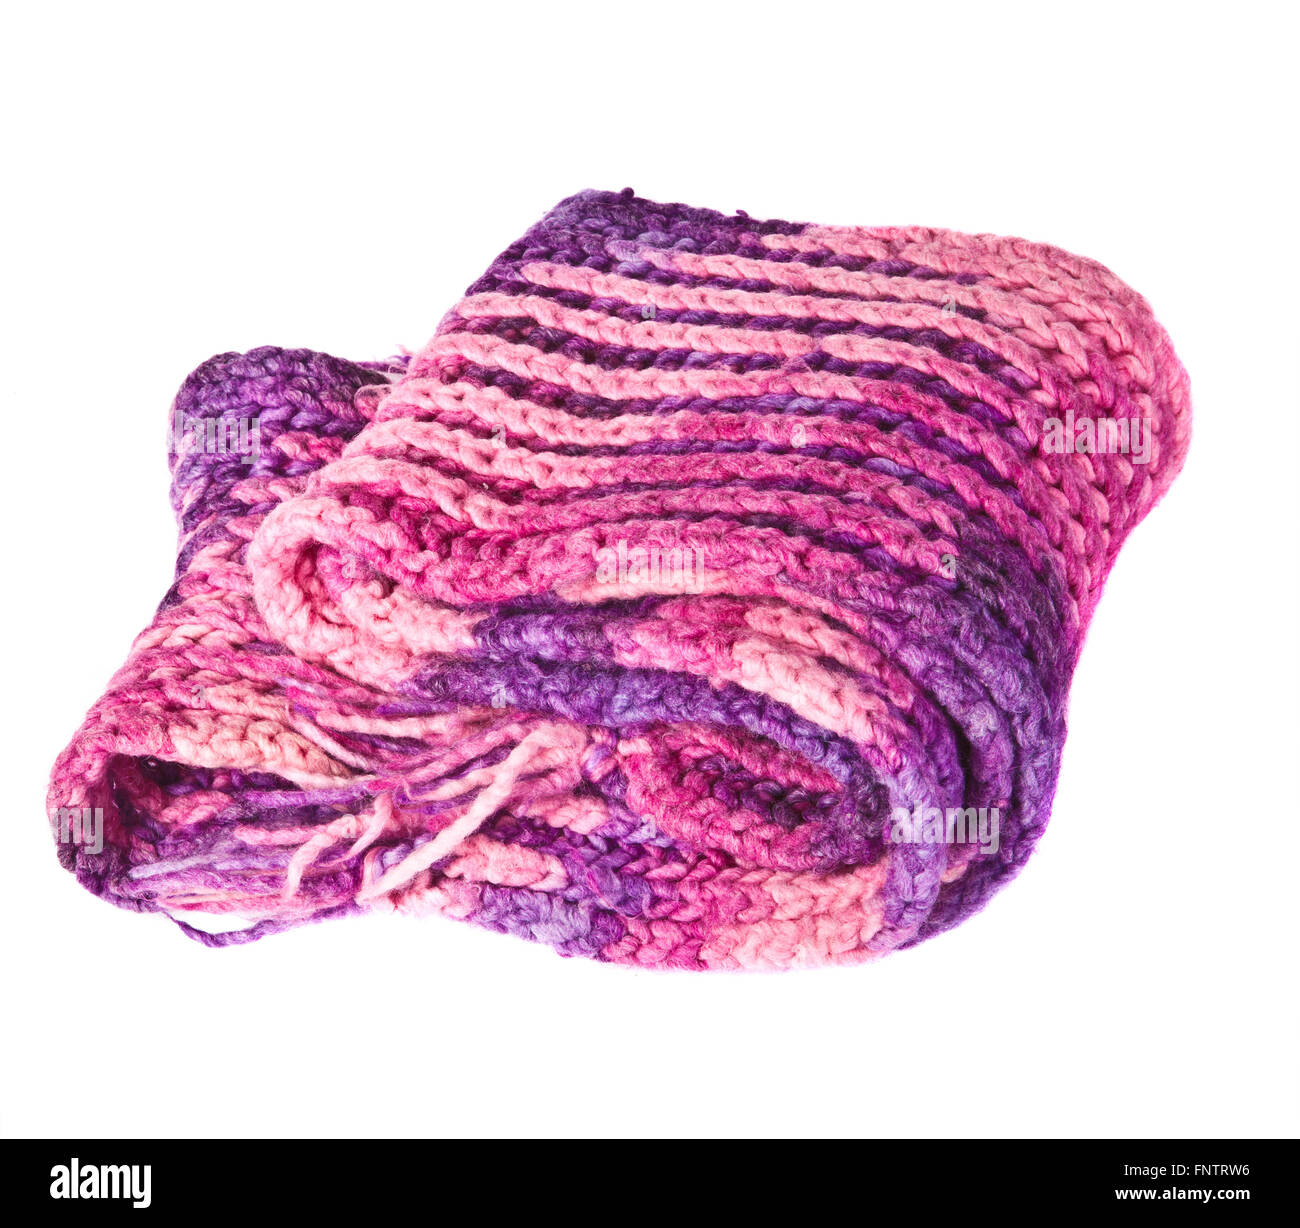 piled knitted scarf on a white background Stock Photo